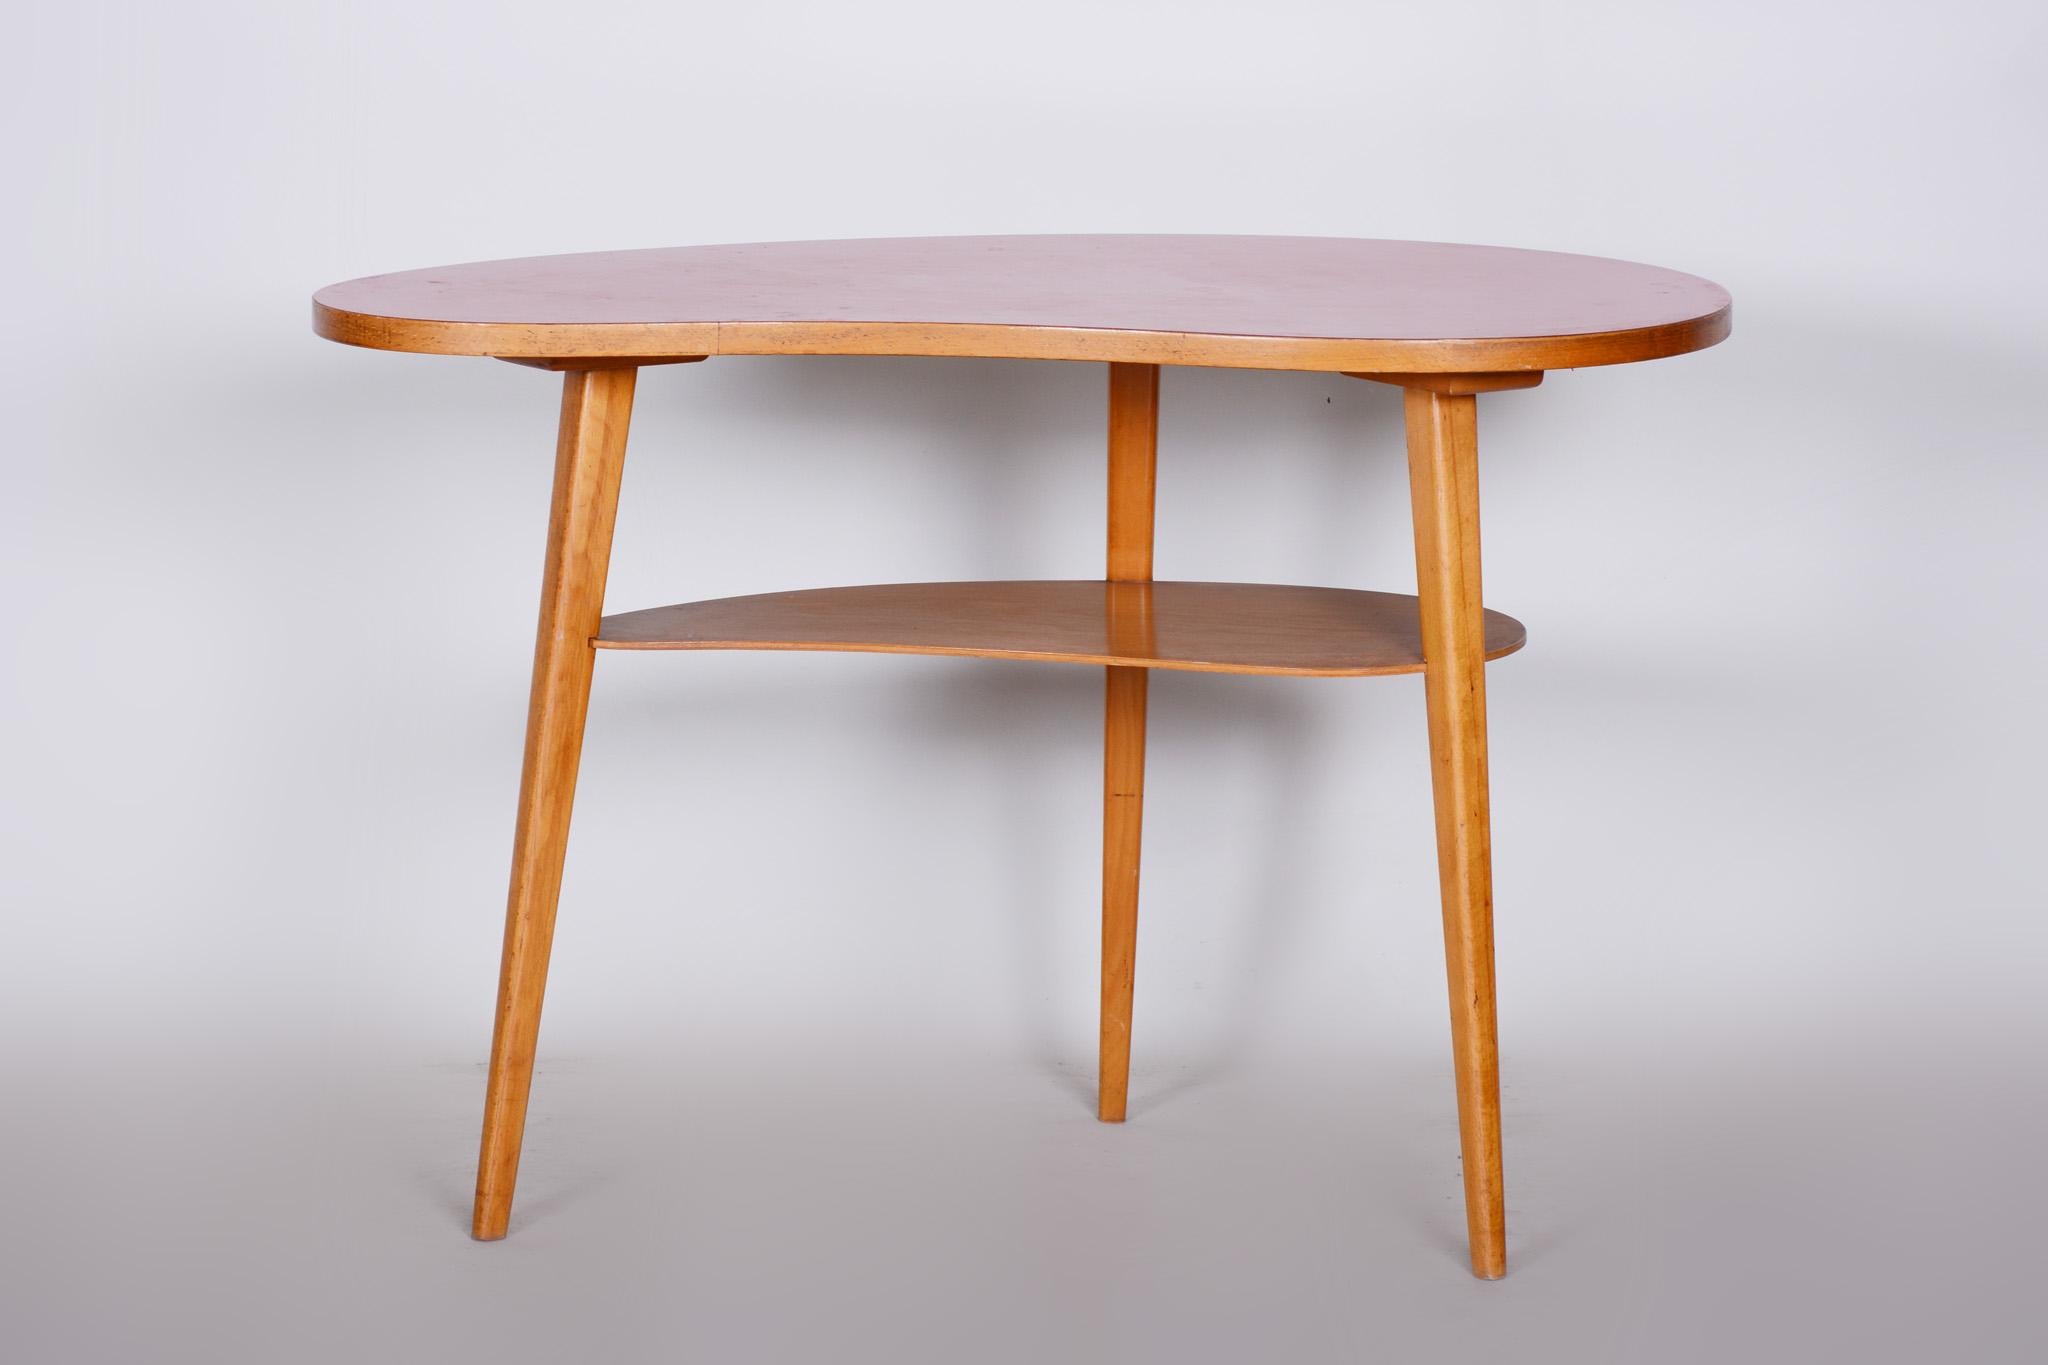 Small table.
Czech midcentury
Material: Walnut and beech
Period: 1950-1959.